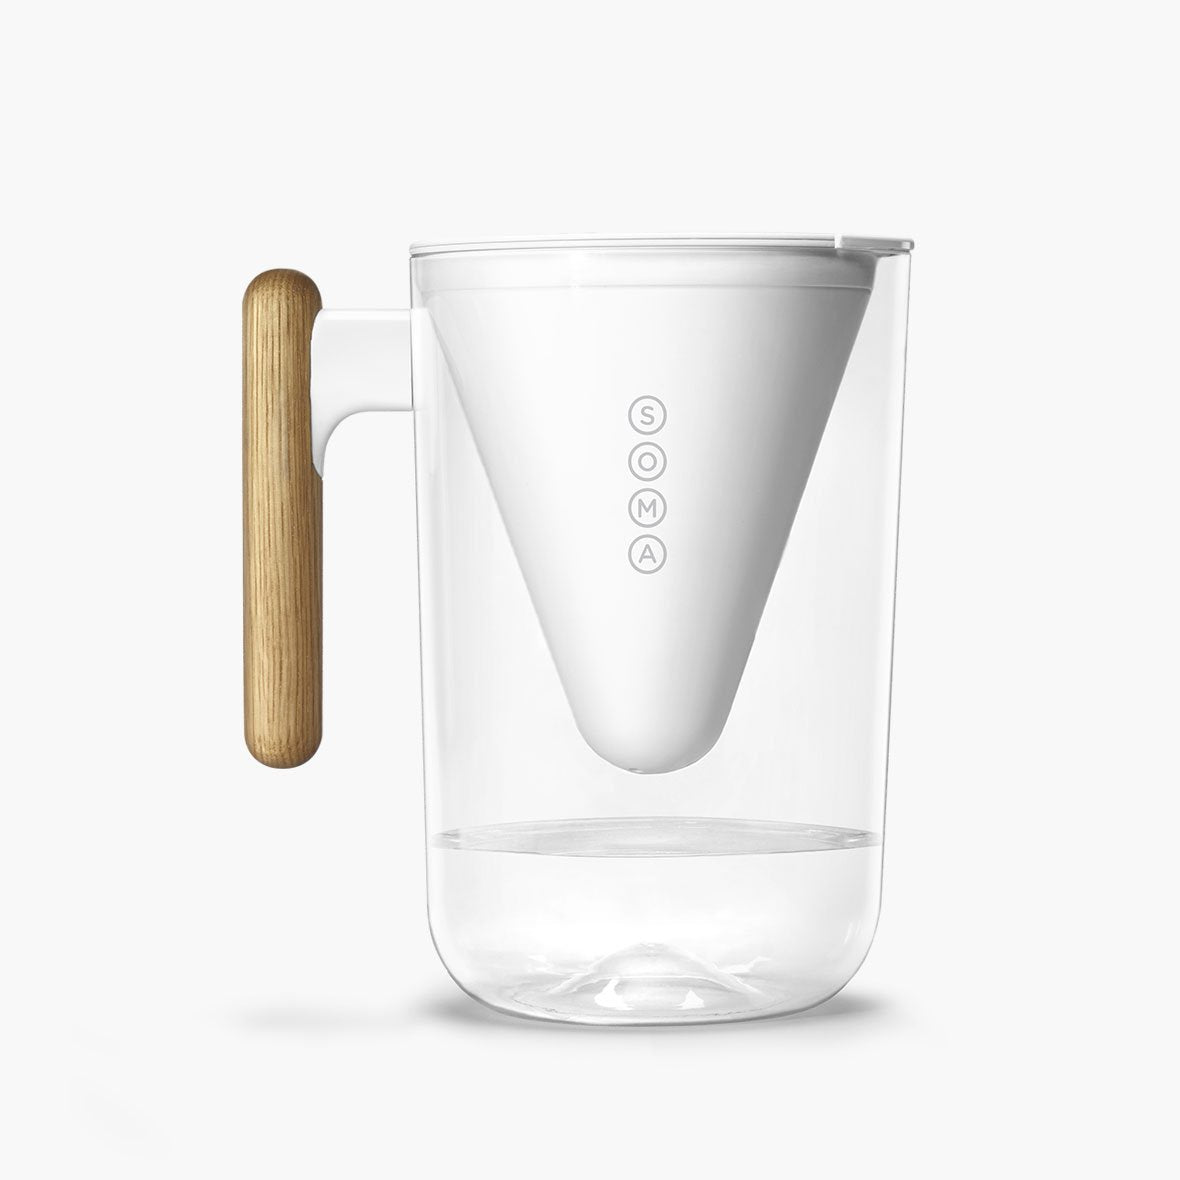 Best Soma Water Filter Pitcher for sale in Fond Du Lac, Wisconsin